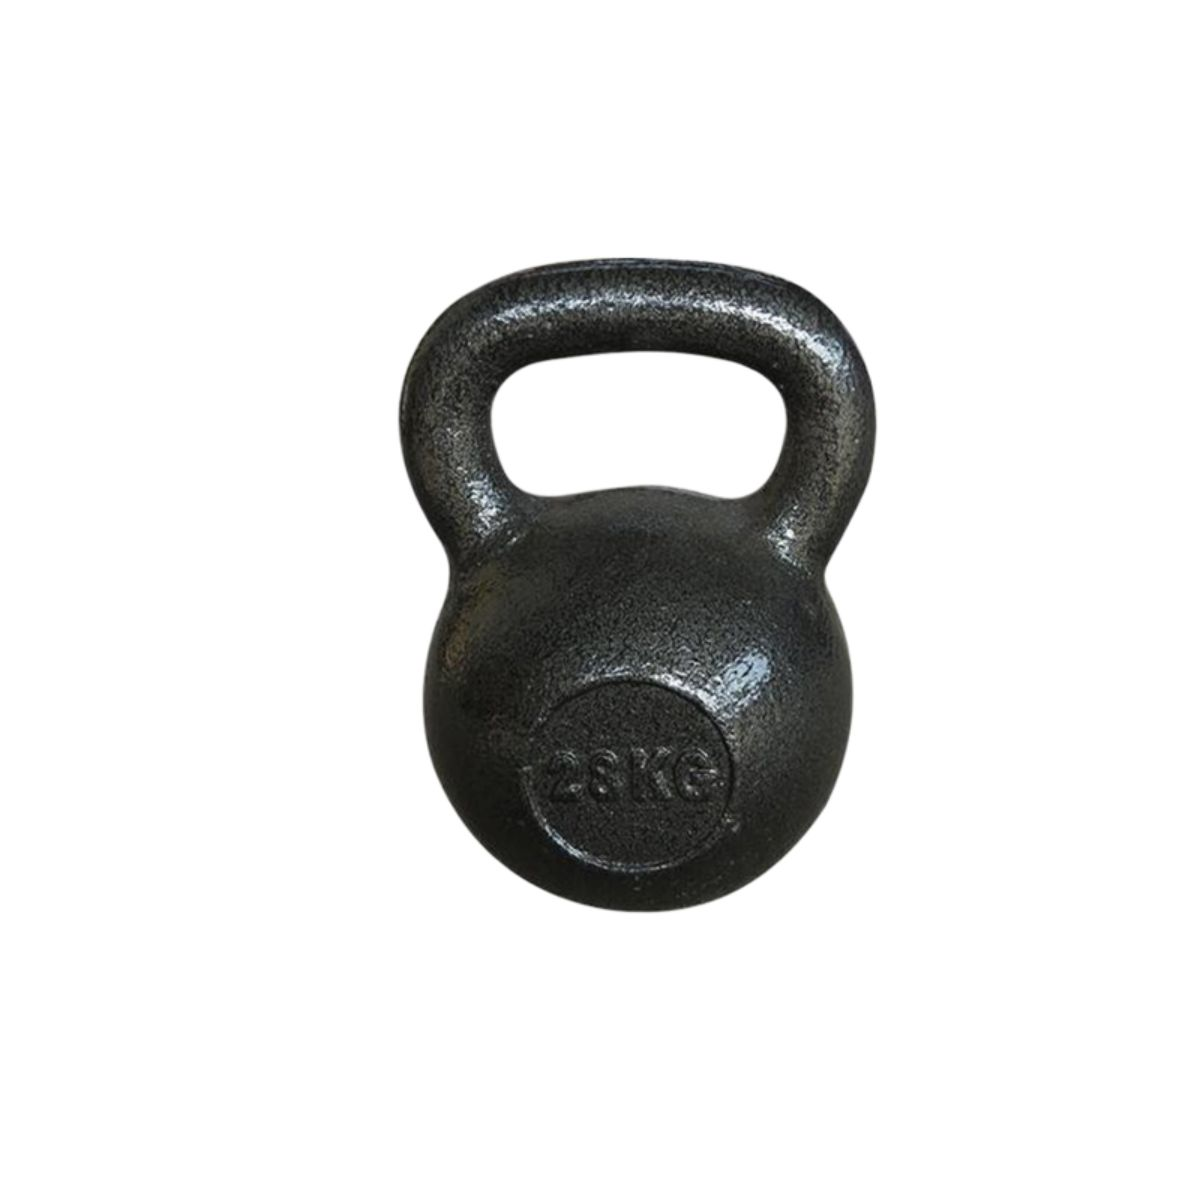 14kg 15kg 20kg 24kg 28kg 30kg 35kg 36kg 40kg Cast Iron Kettlebells Featured Image